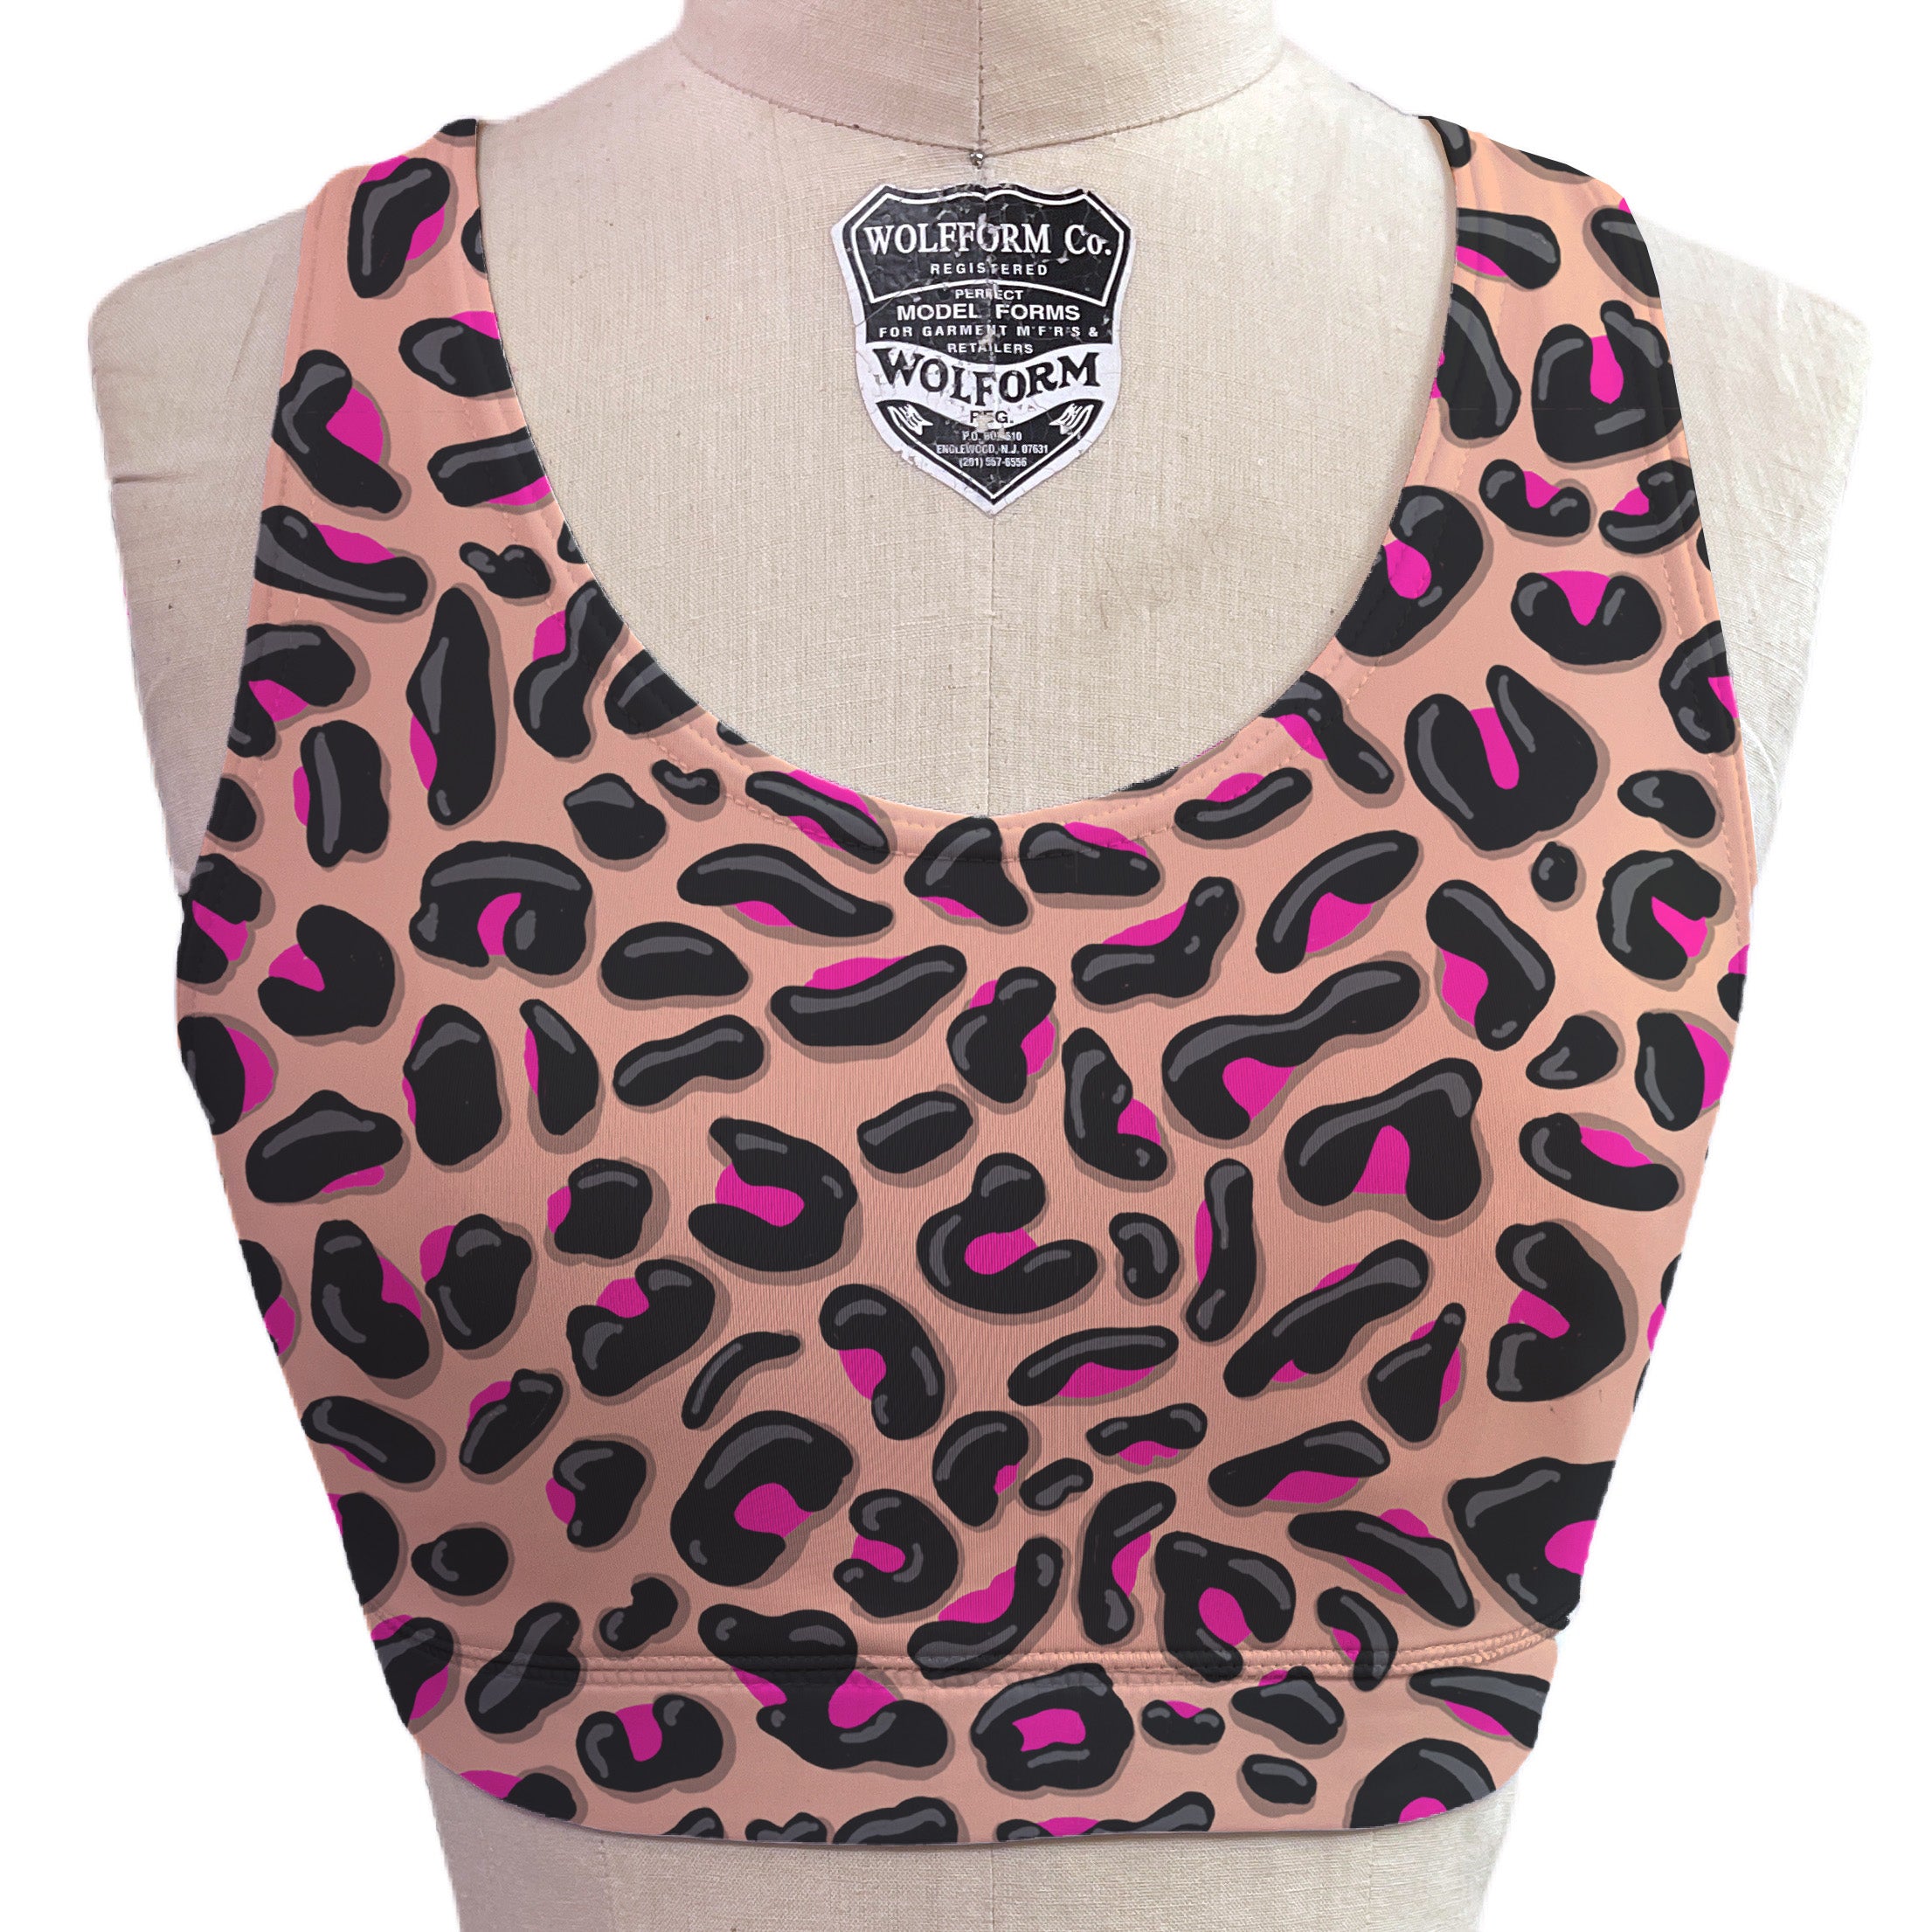 Pink Leopard sports bra is the perfect workout top. The